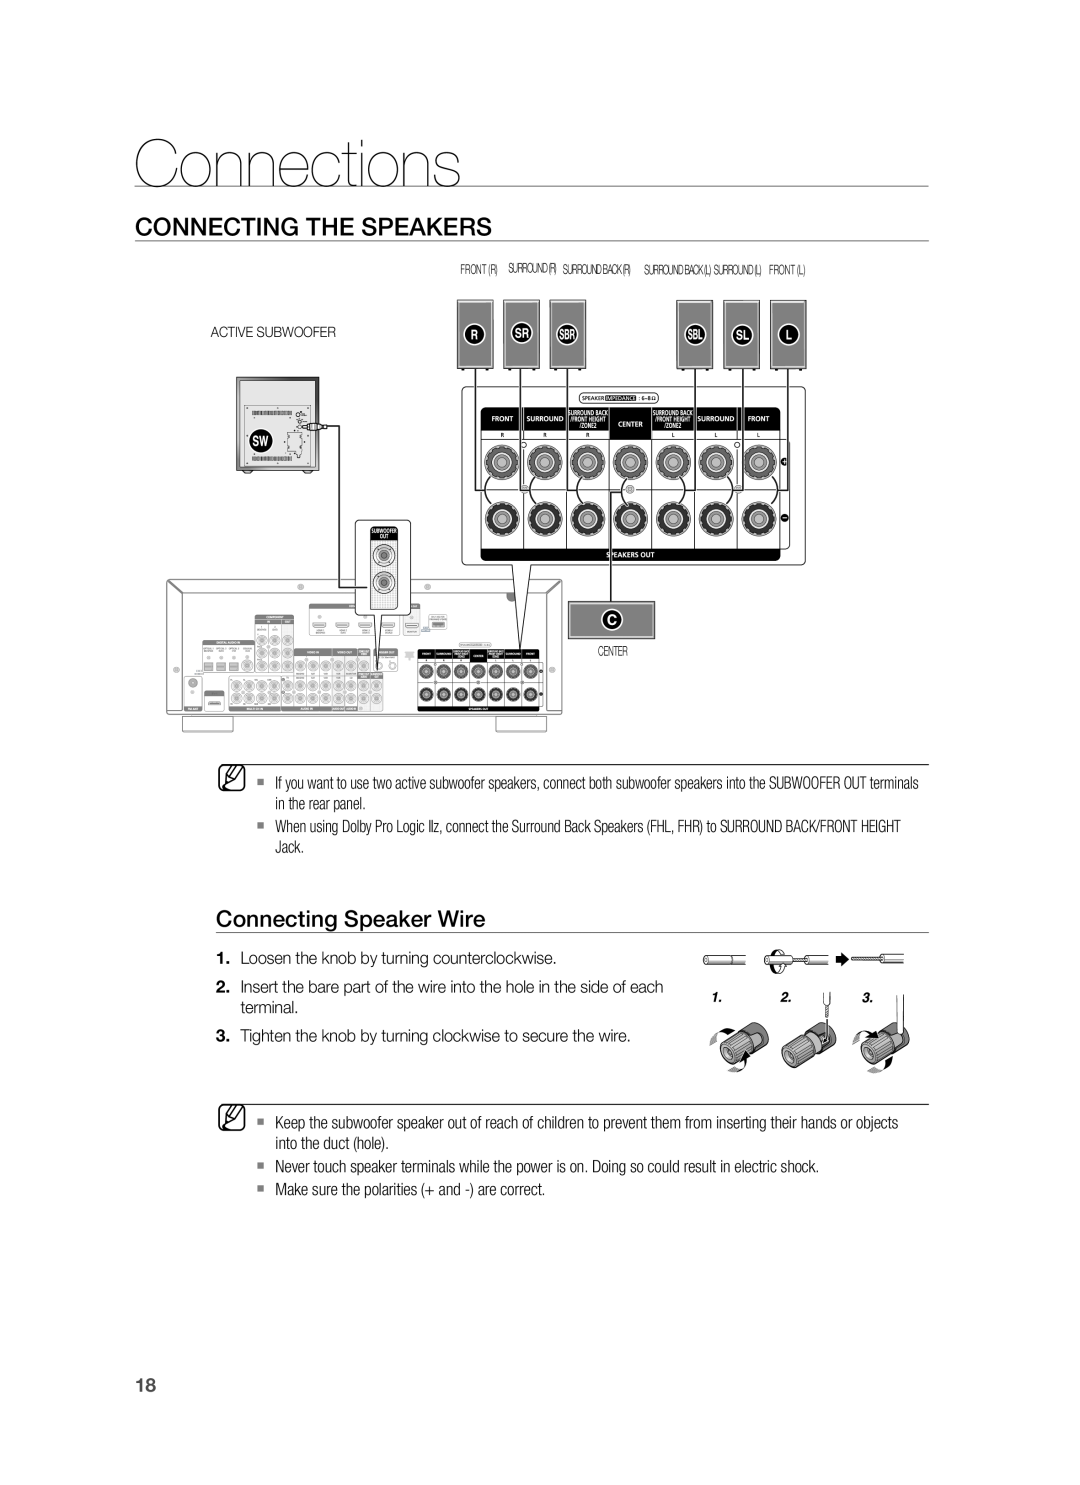 Samsung HW-C900-XAA user manual Connections, Connecting The Speakers, Connecting Speaker Wire 